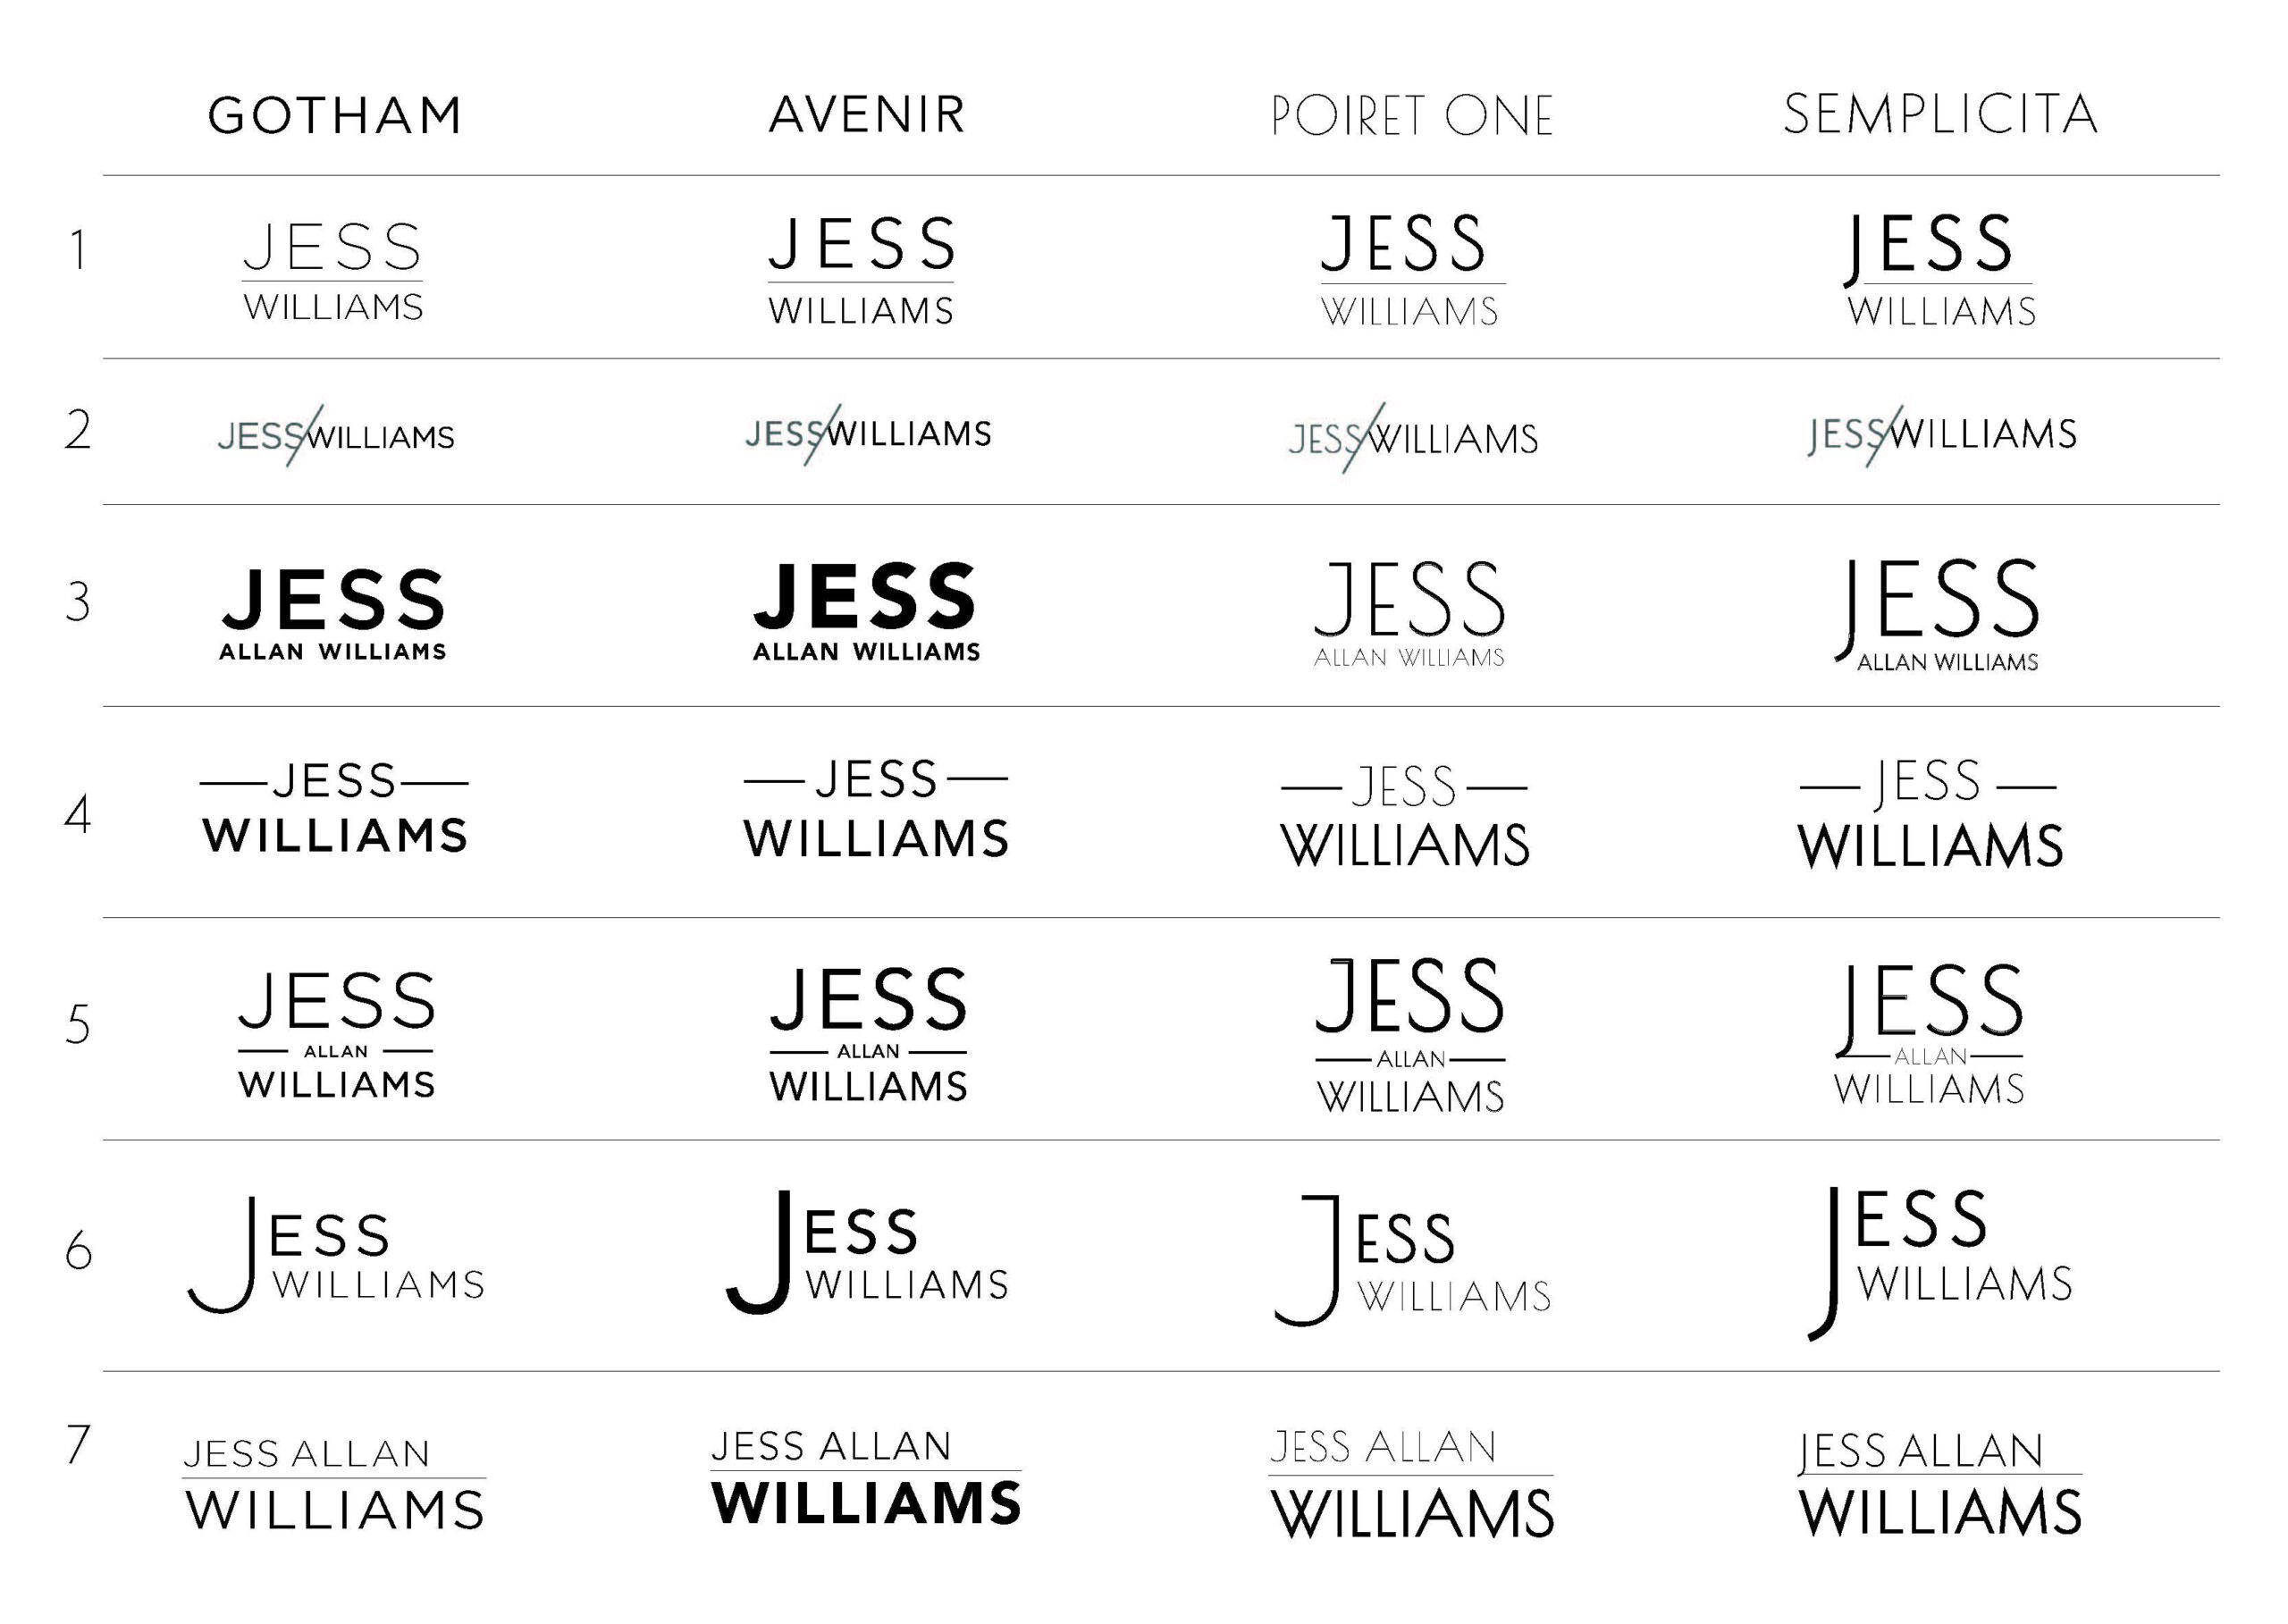 First round of choices Lindsay sent to Jess for his Wordmark